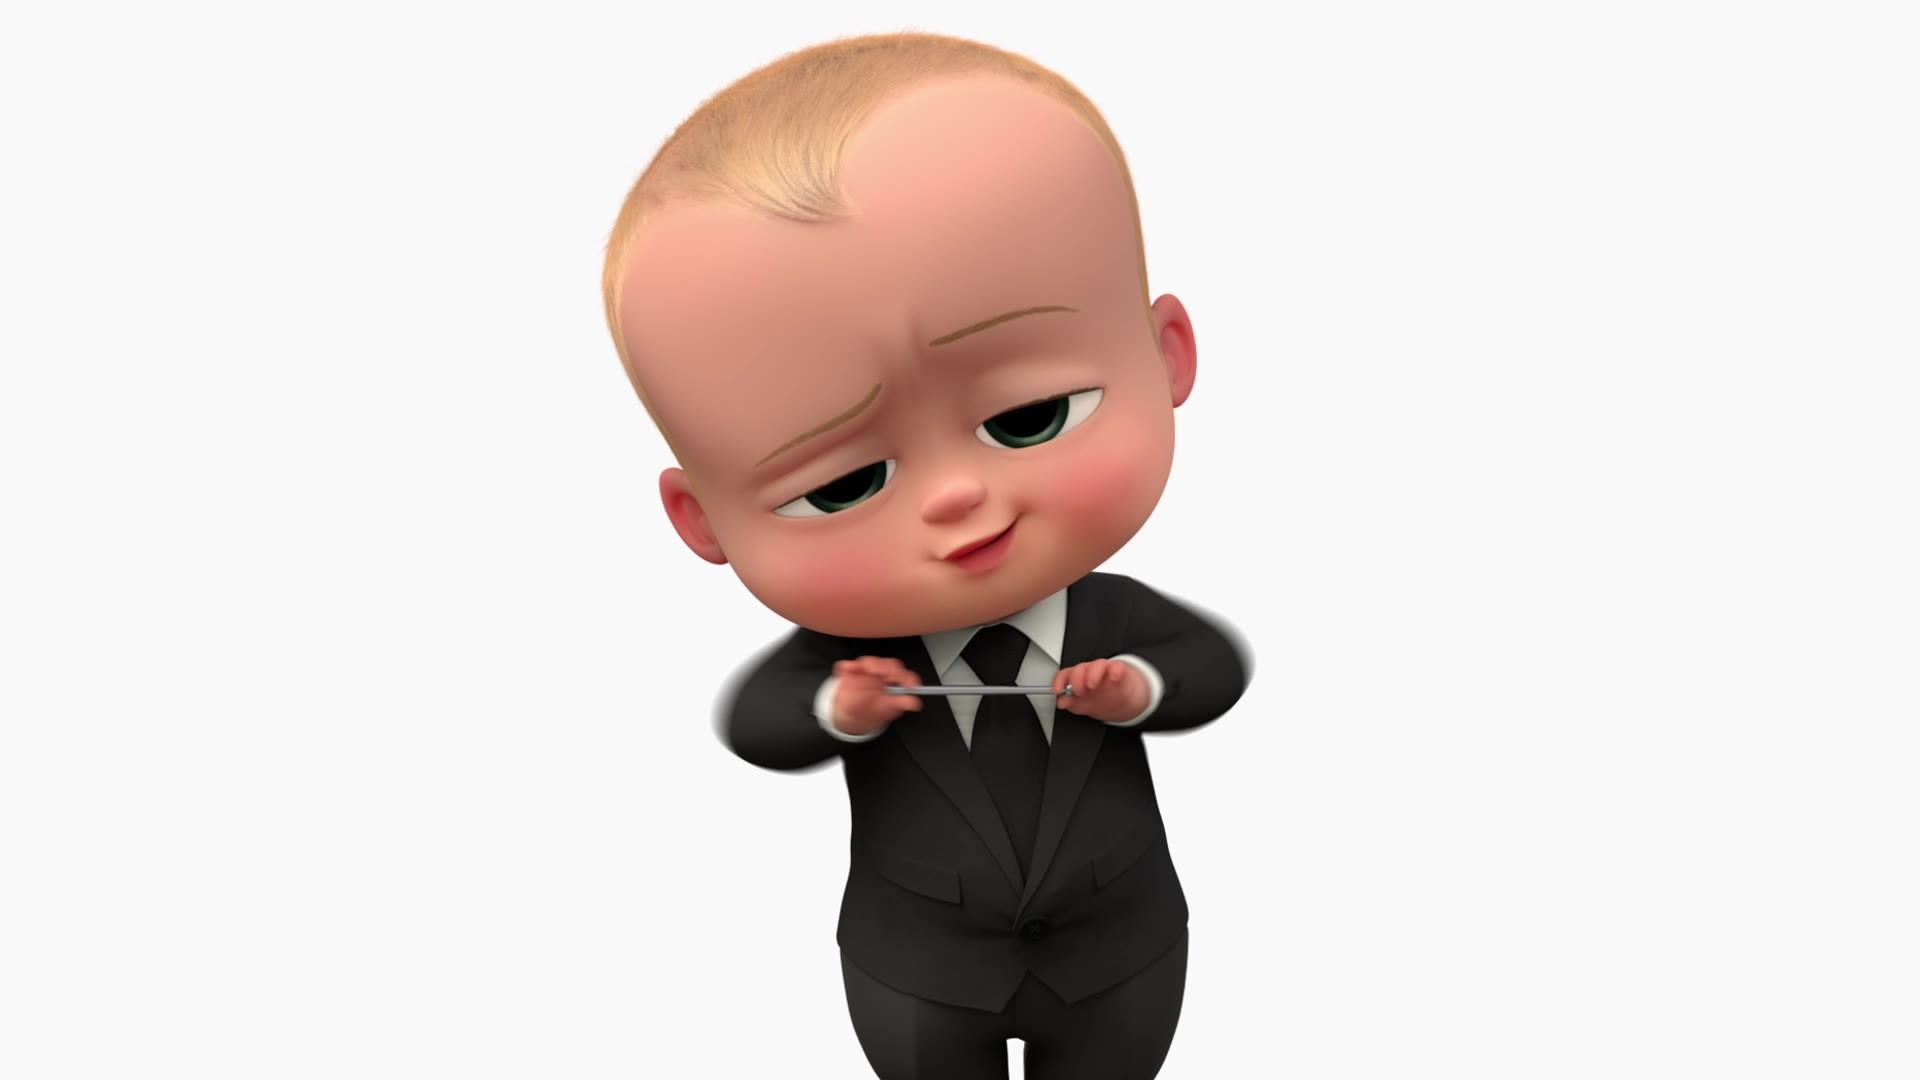 The Boss Baby Wallpaper Baby No Background, Download